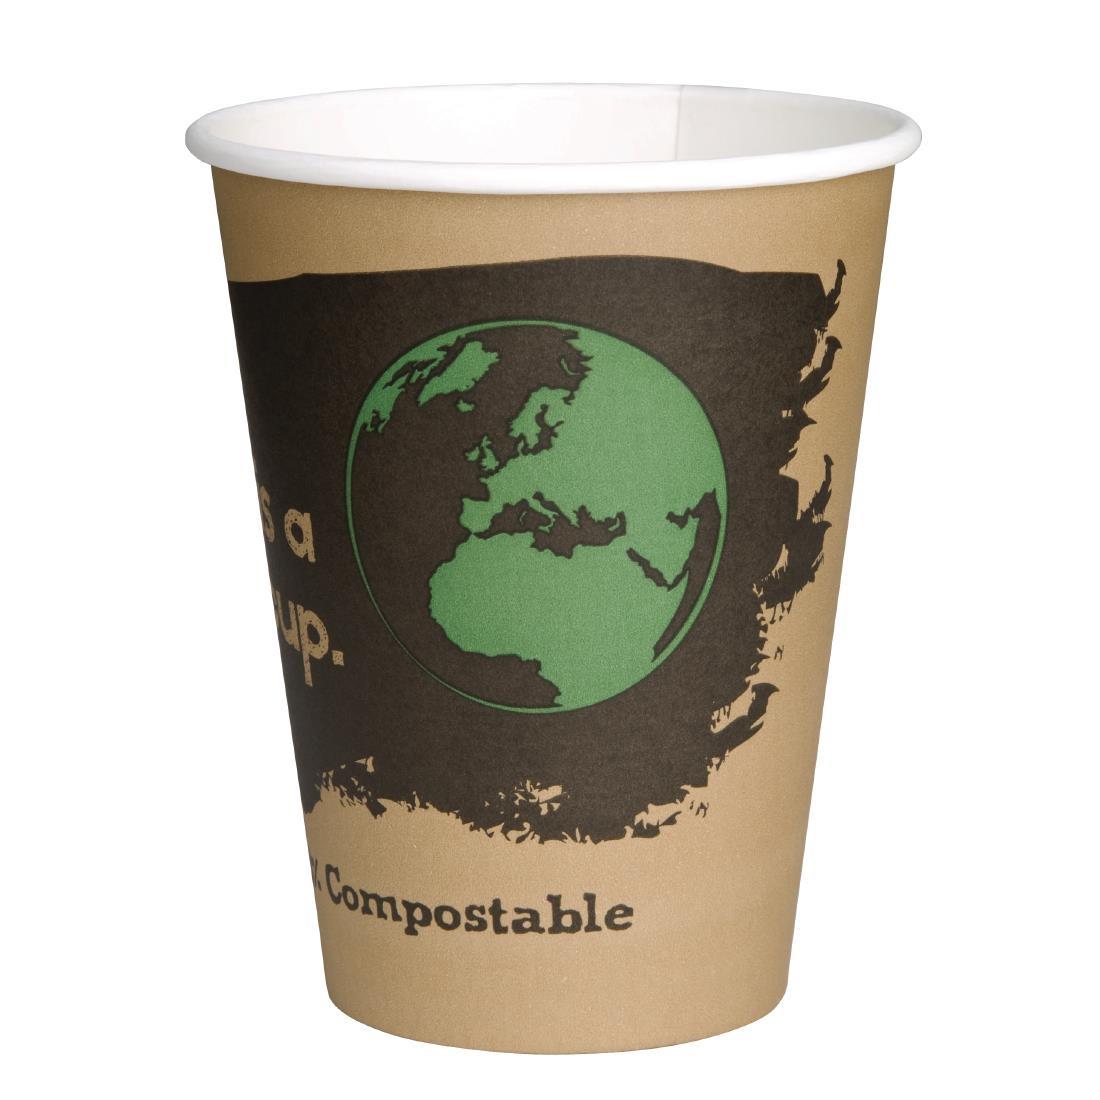 Fiesta Green 12oz Compostable Hot Cups and Lids Bundle (Pack of 1000) - SA486  - 3